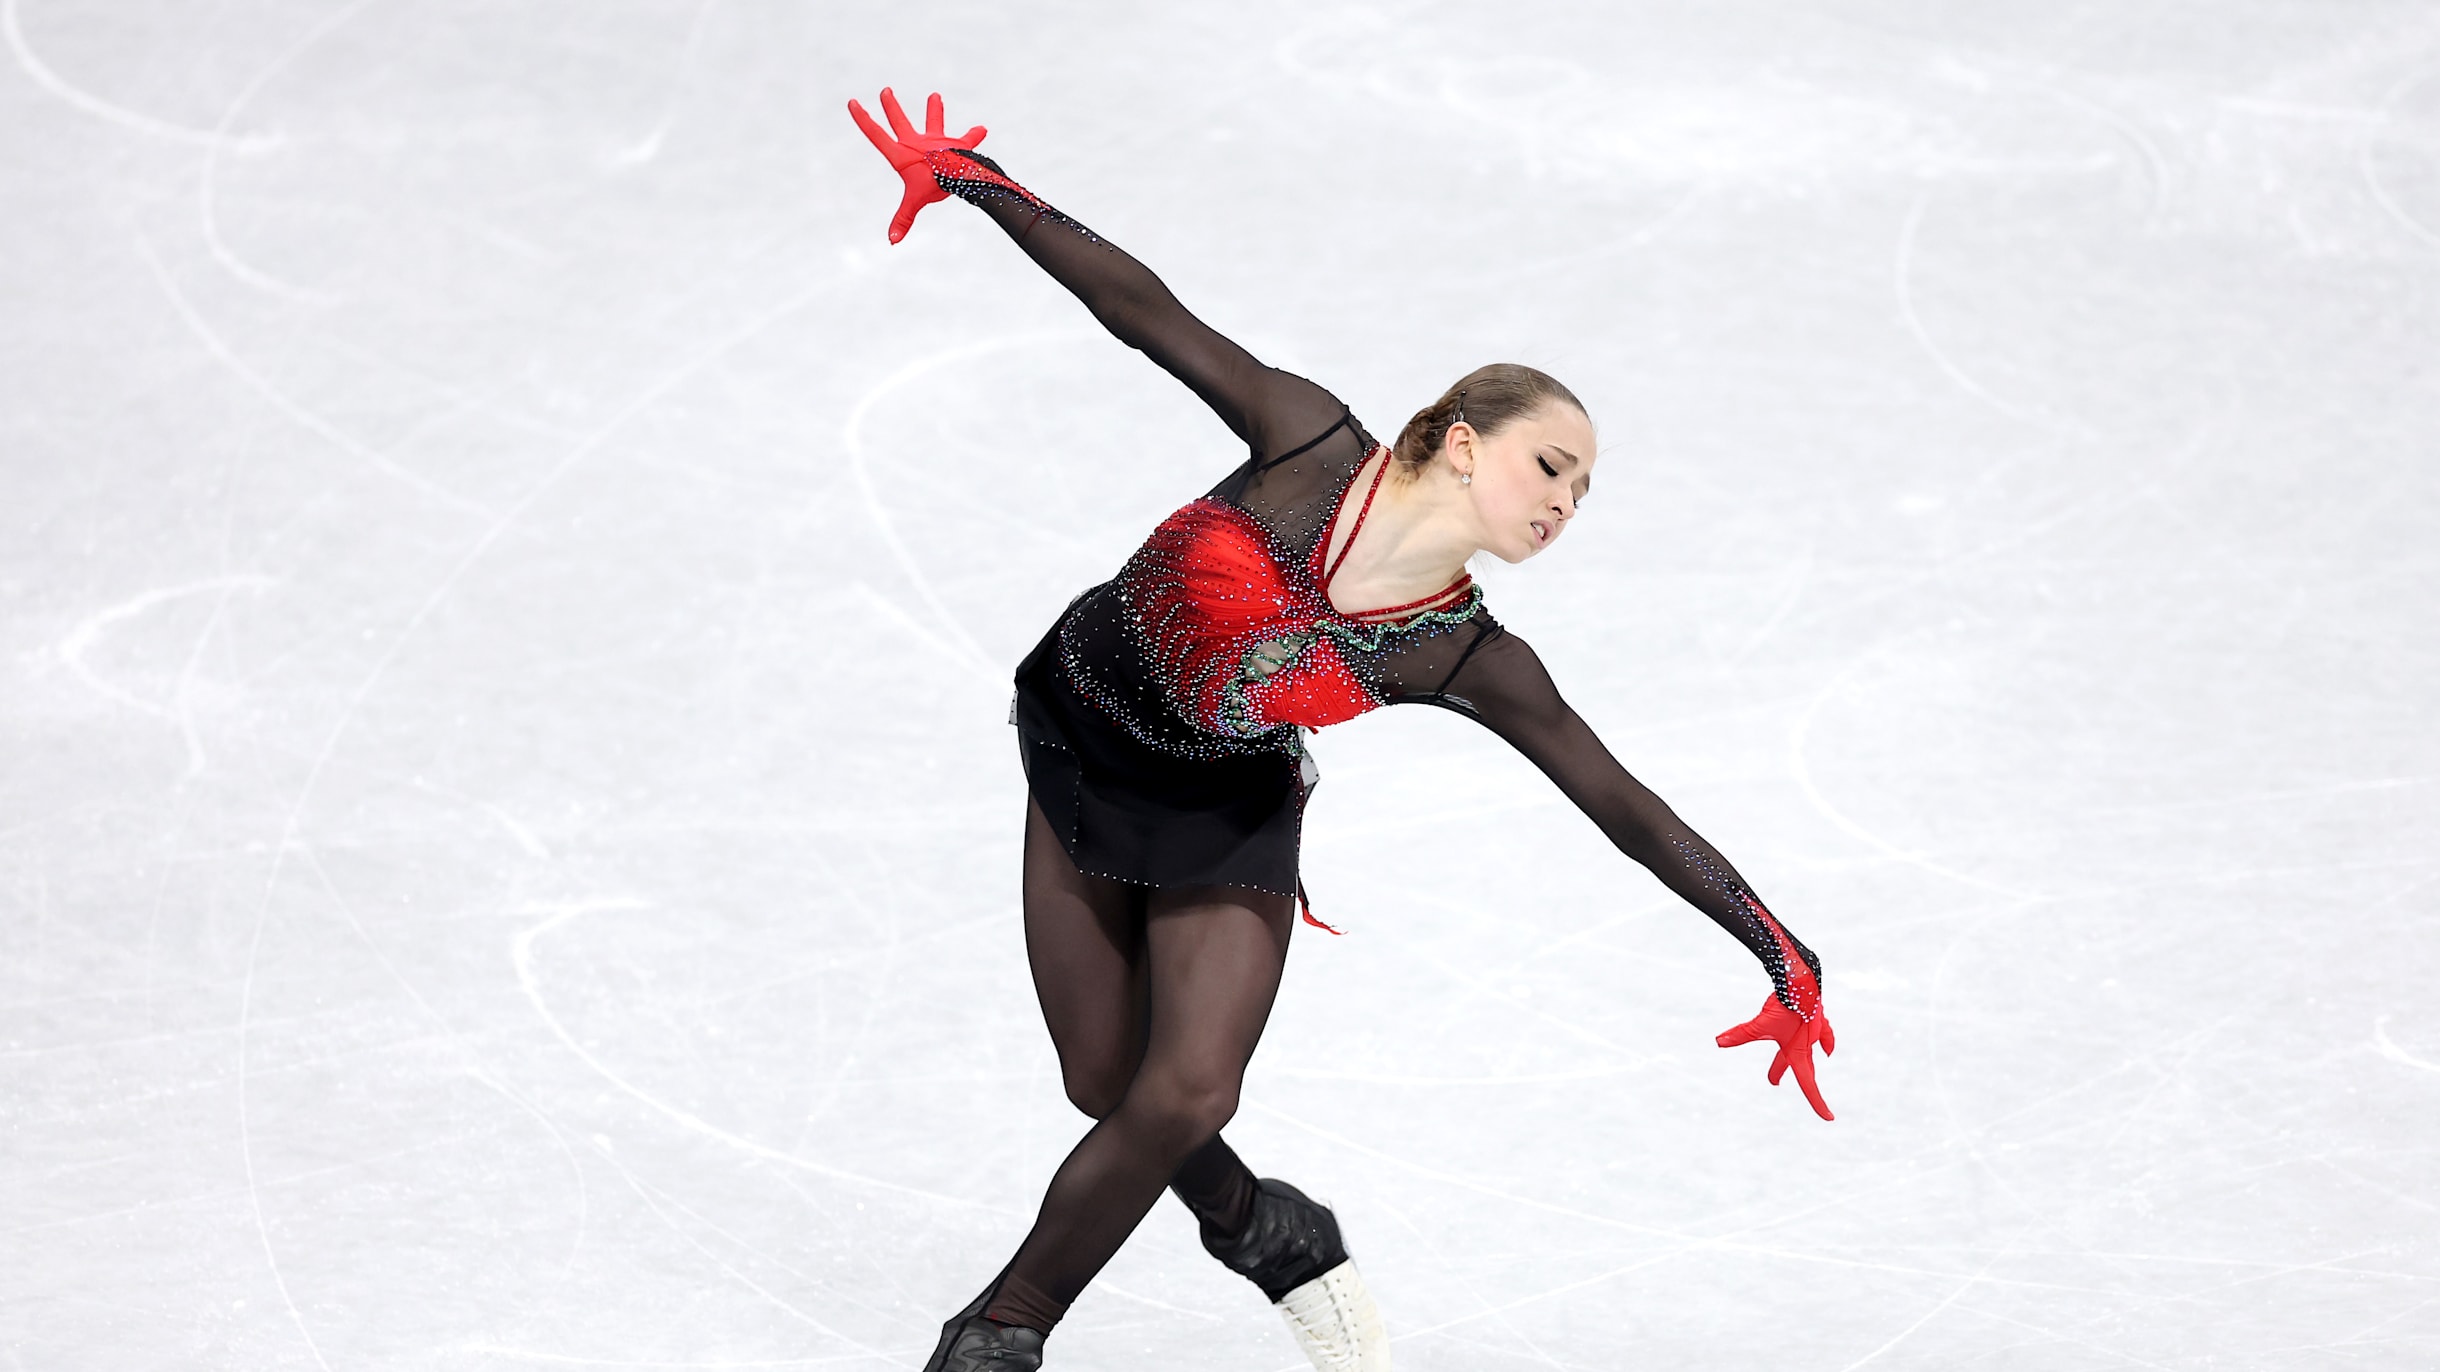 Quadruple jumps in women's figure skating: What to expect at Olympics